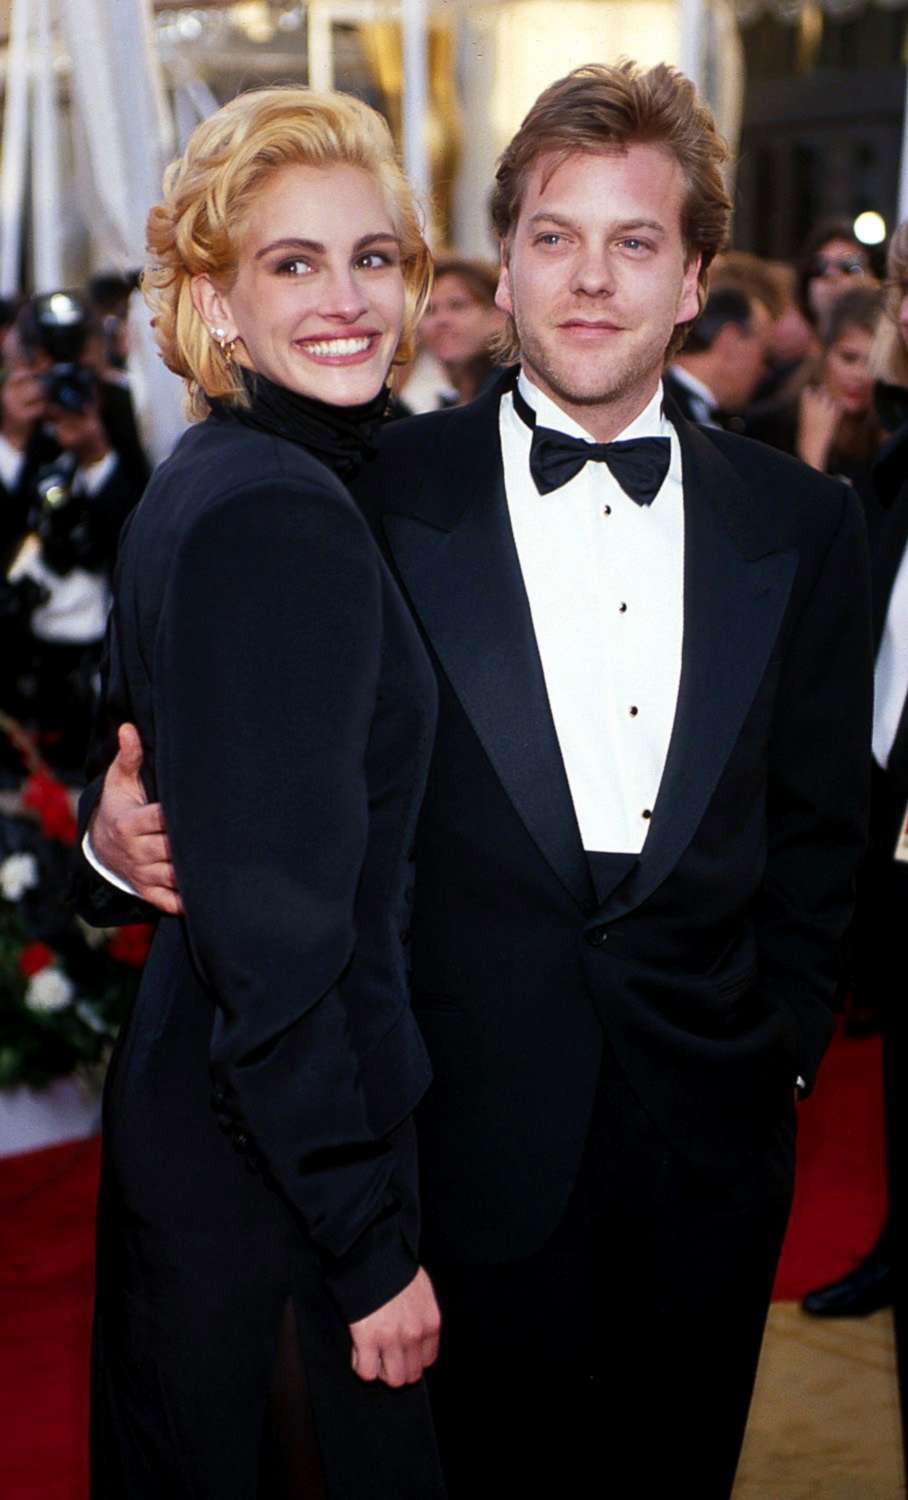 PHOTO: Julia Roberts and Kiefer Sutherland walk the red carpet for the 63rd Annual Academy Awards at the Shrine Auditorium in Los Angeles, March 25, 1991.